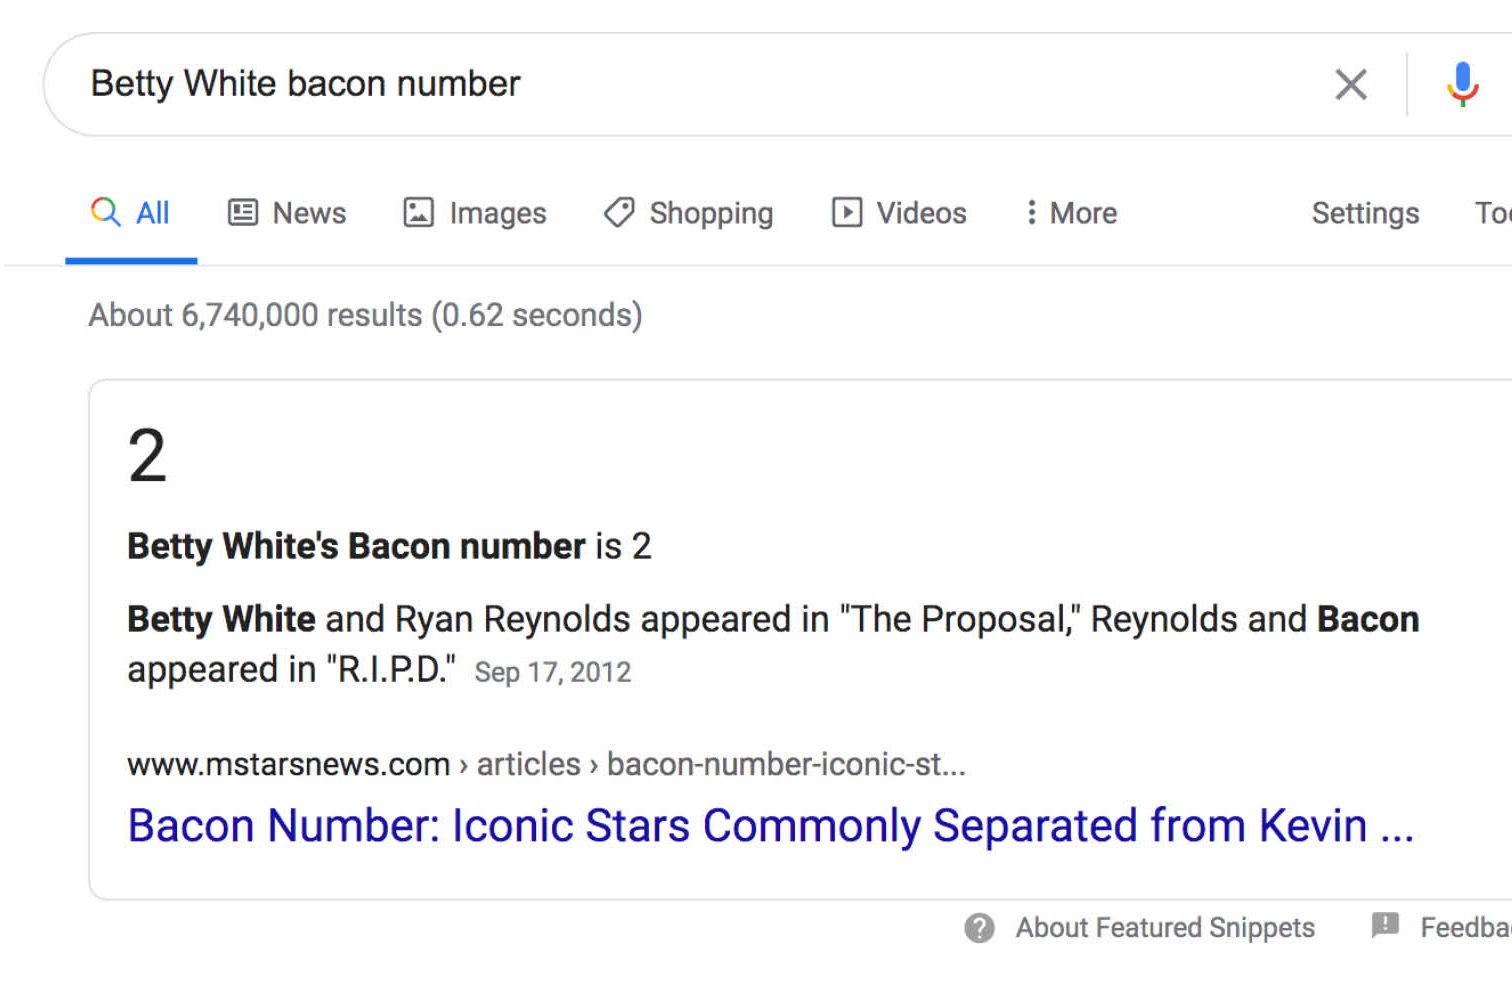 Google: Bacon Number